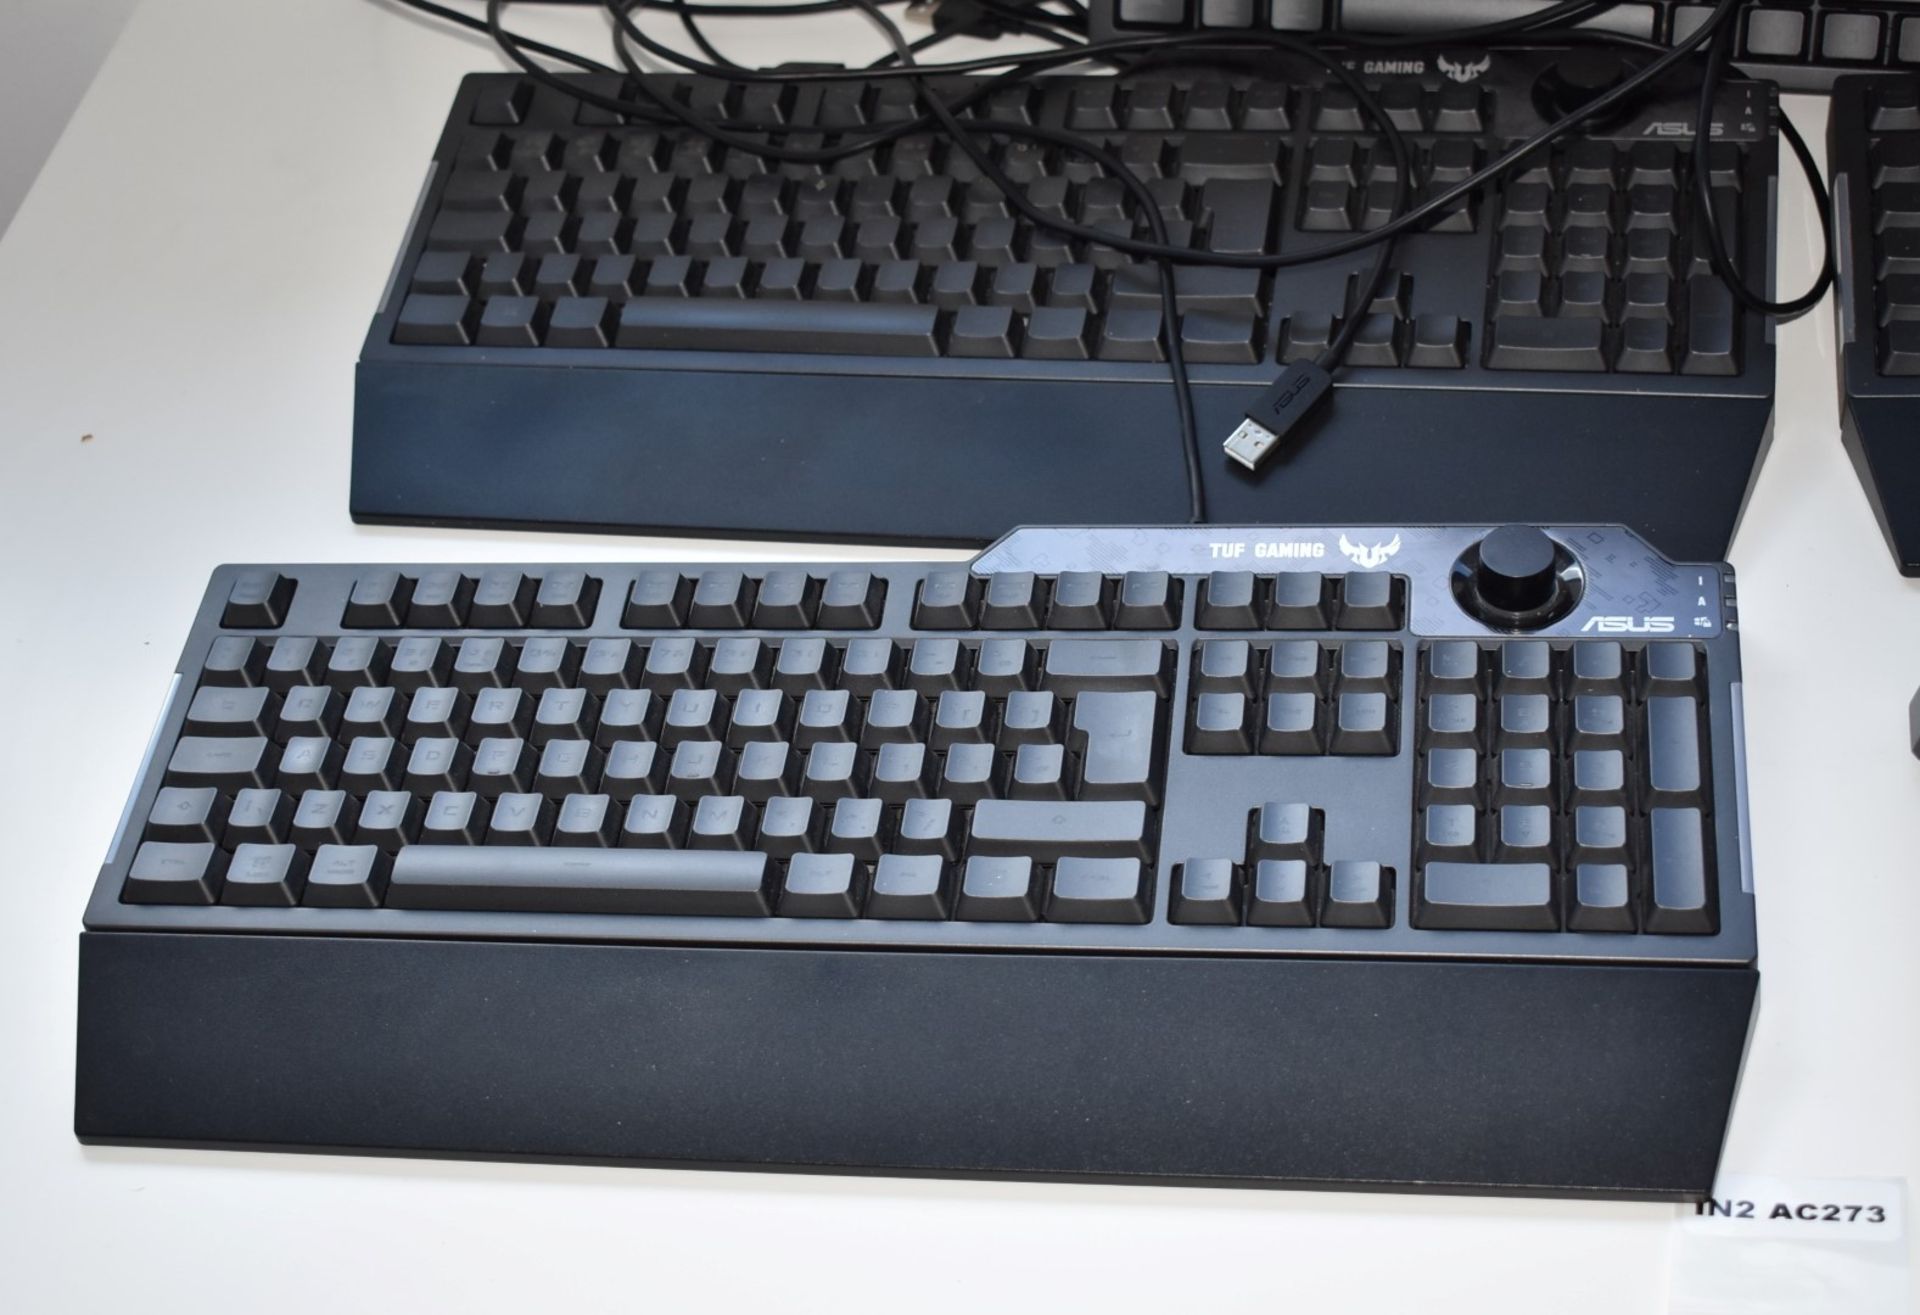 5 x Asus TUF K1 RGB Gaming Keyboards - Office Use Only - Image 5 of 6